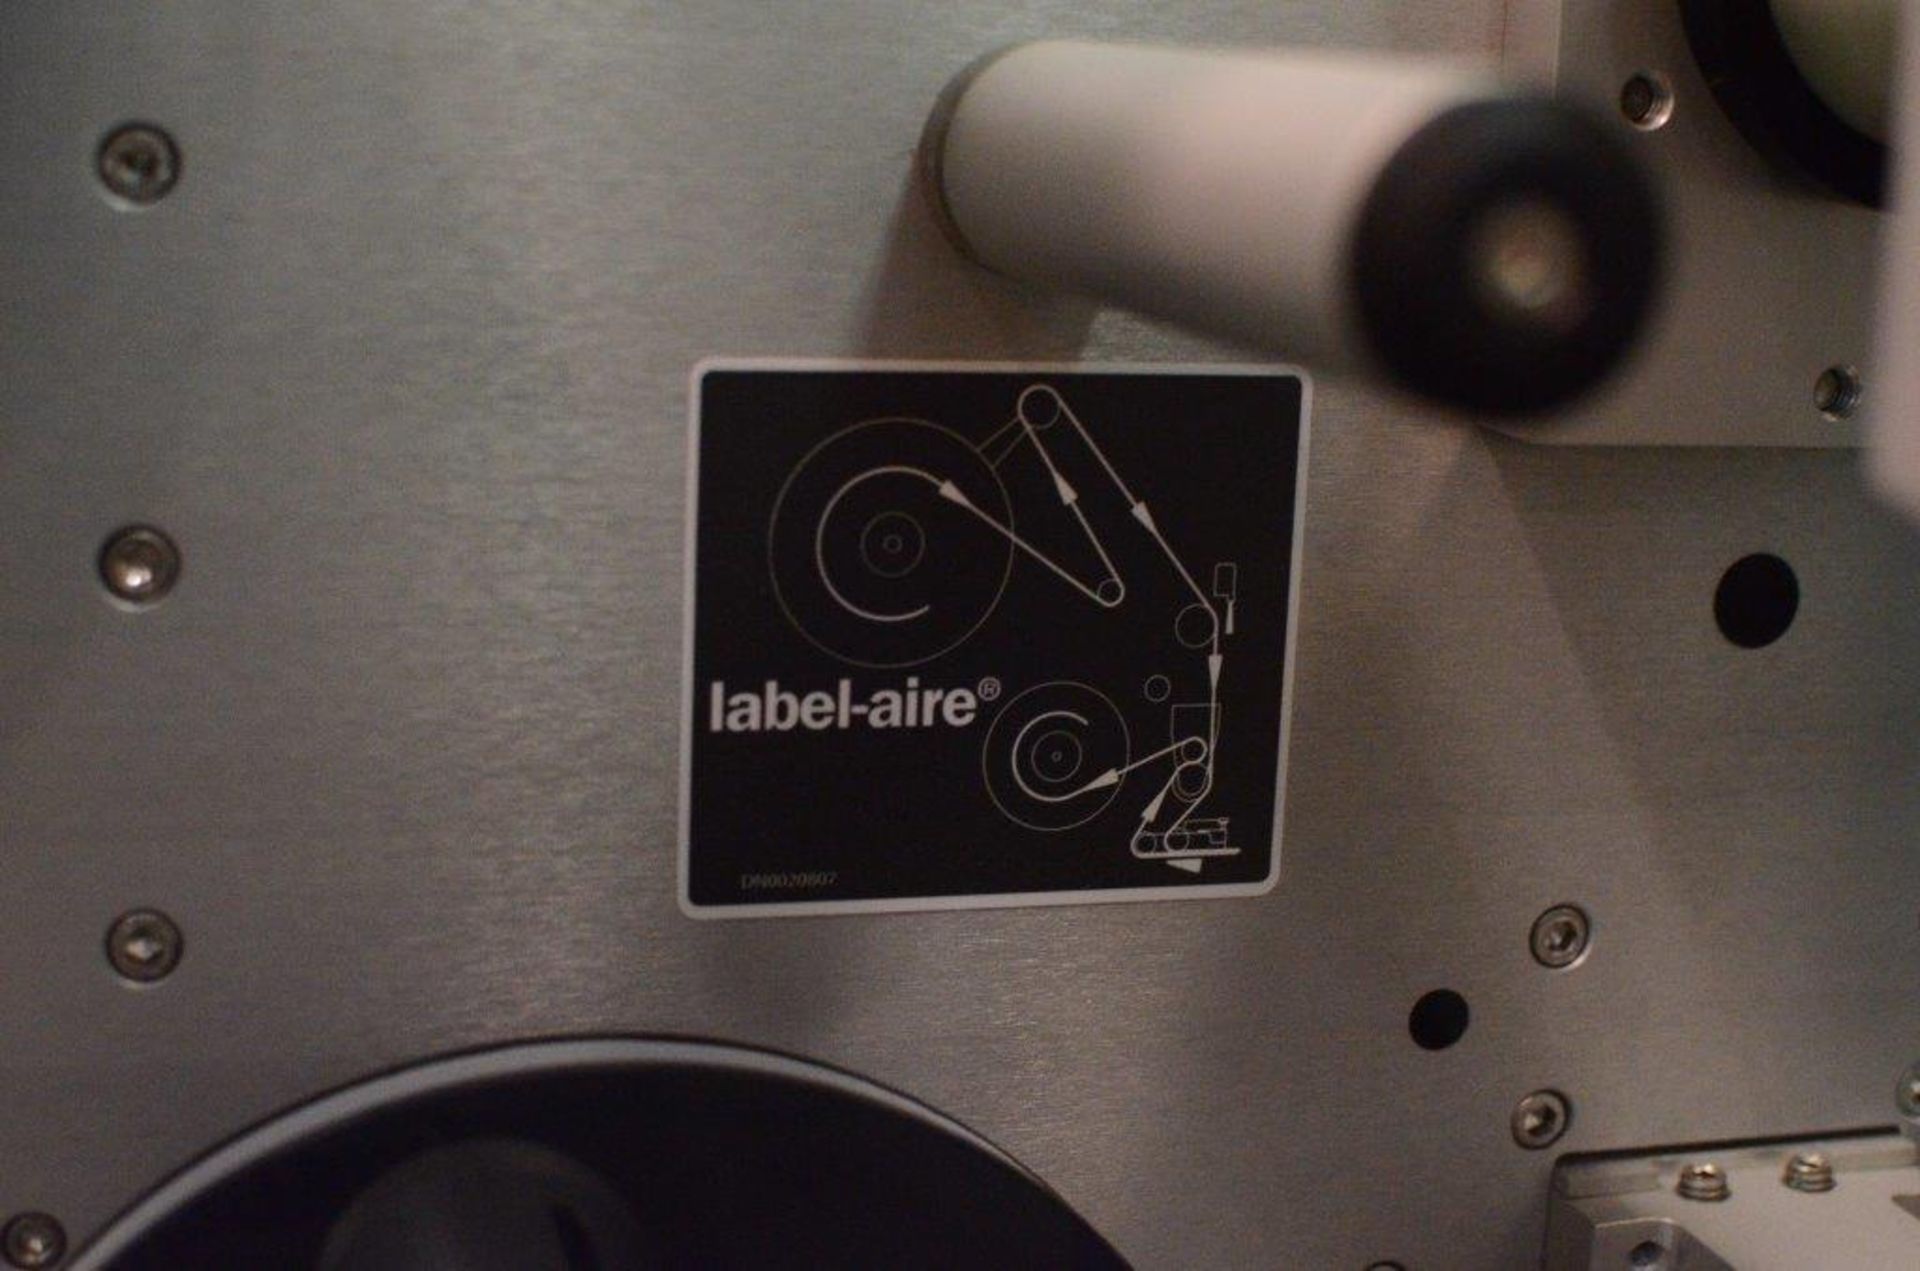 Label-Aire 3114 Dual Action Tamp Label Applicator - Image 5 of 7